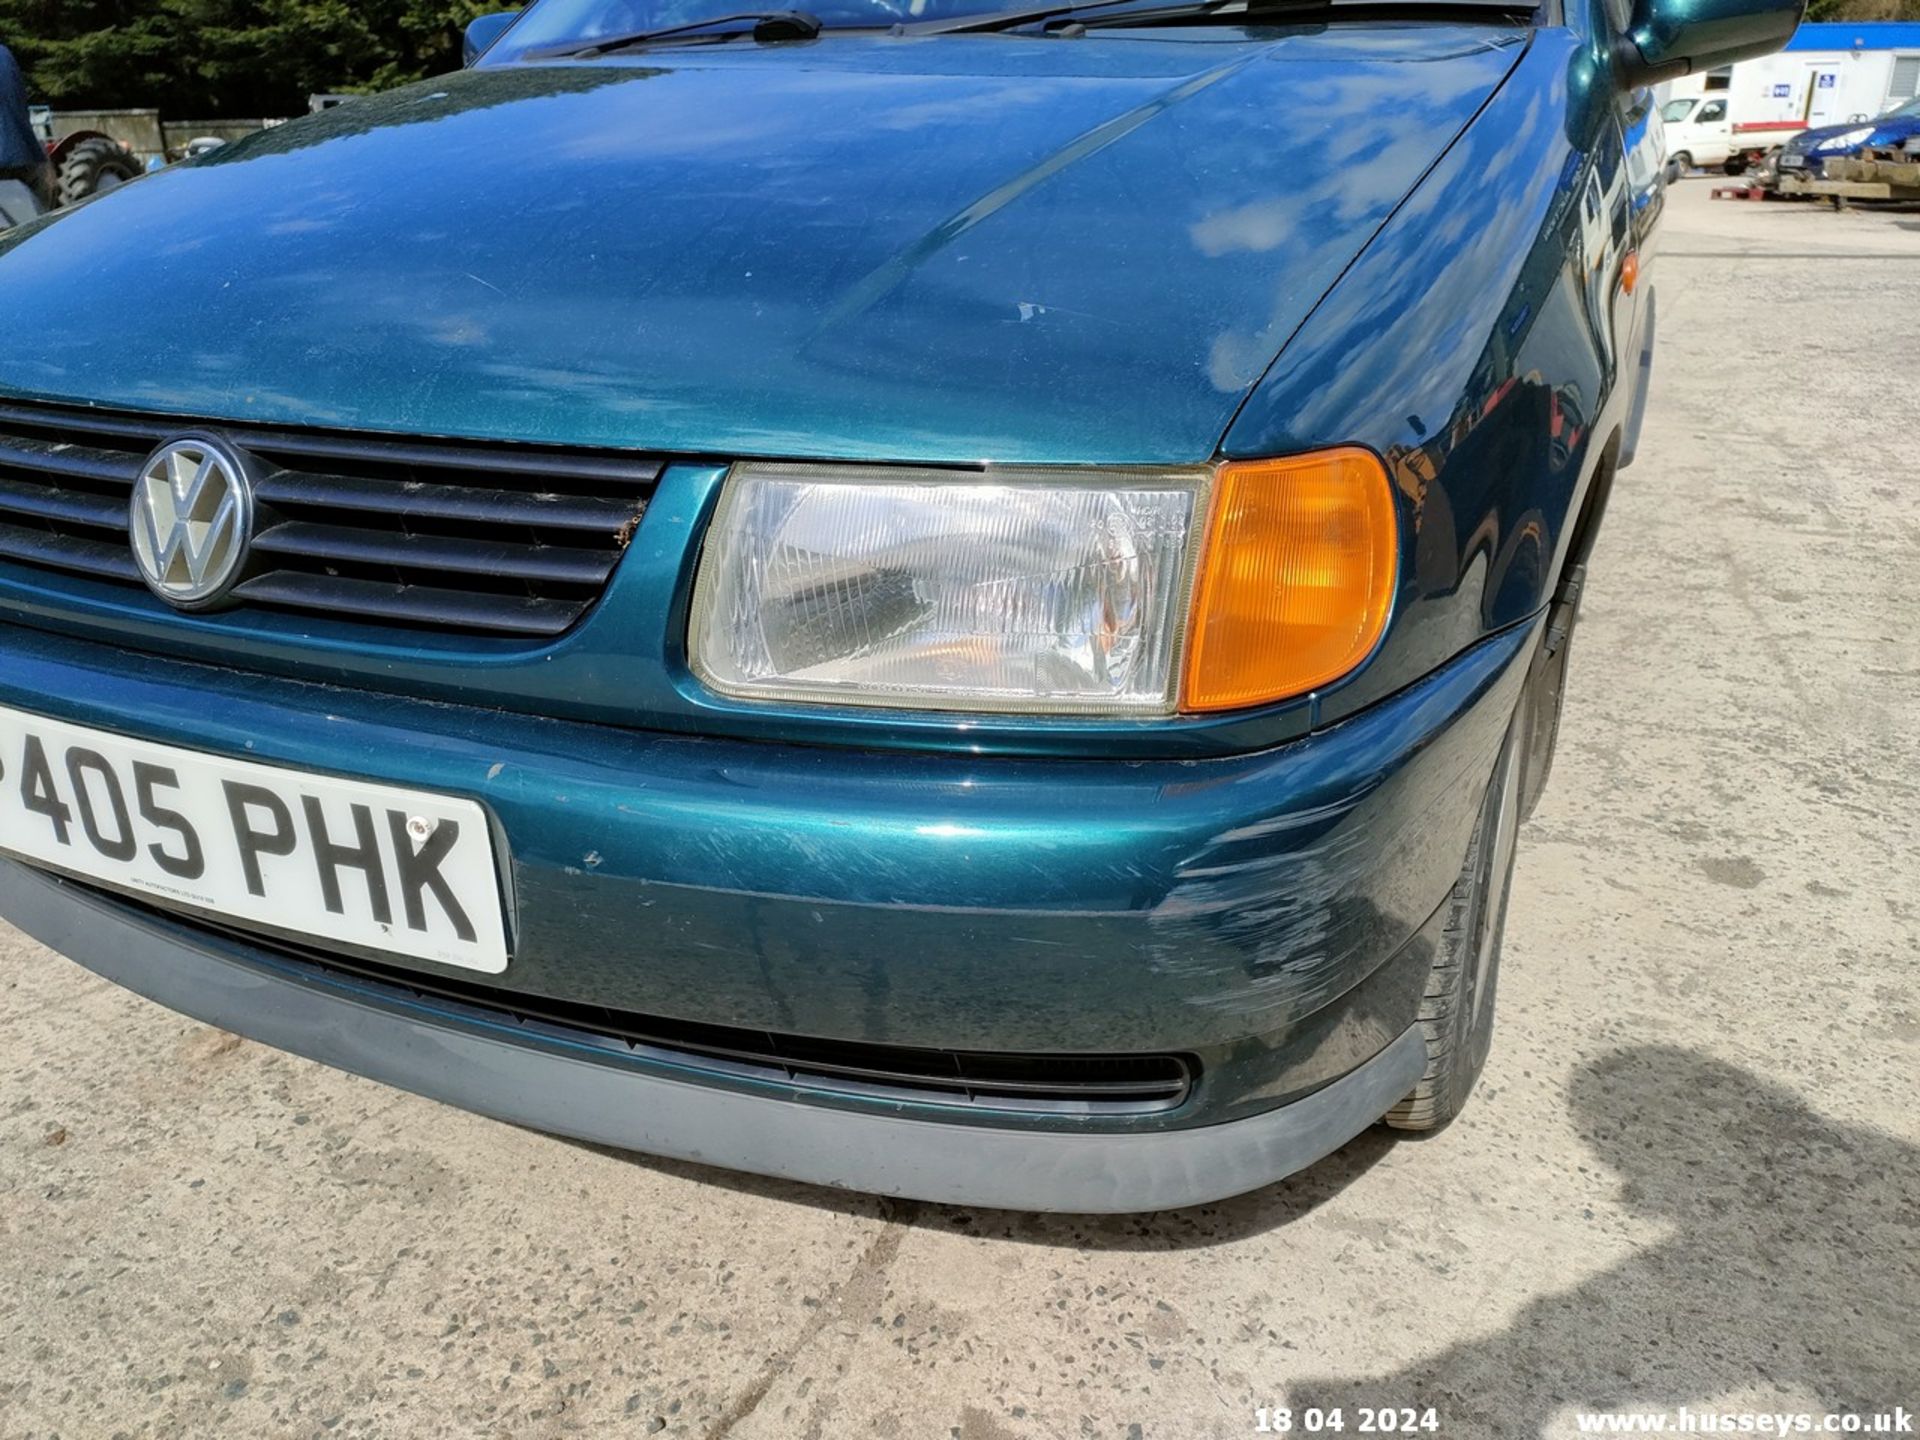 1997 VOLKSWAGEN POLO 1.4 CL AUTO - 1390cc 3dr Hatchback (Green, 68k) - Image 12 of 60